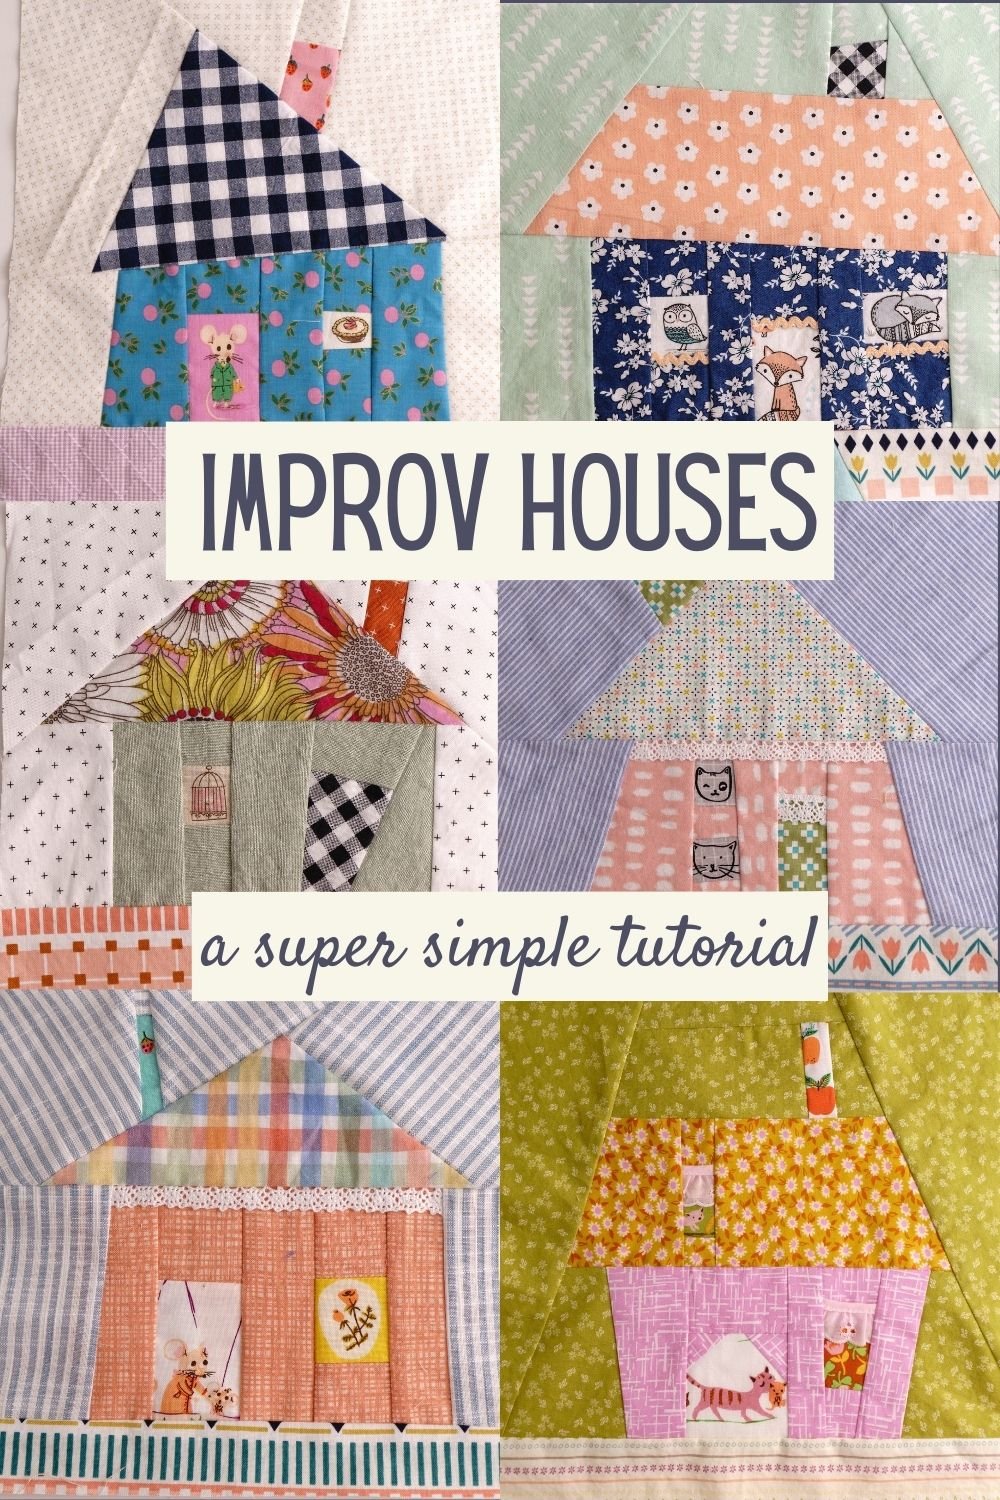 Home – Knitting, Sewing, Patchwork and Quilting tools